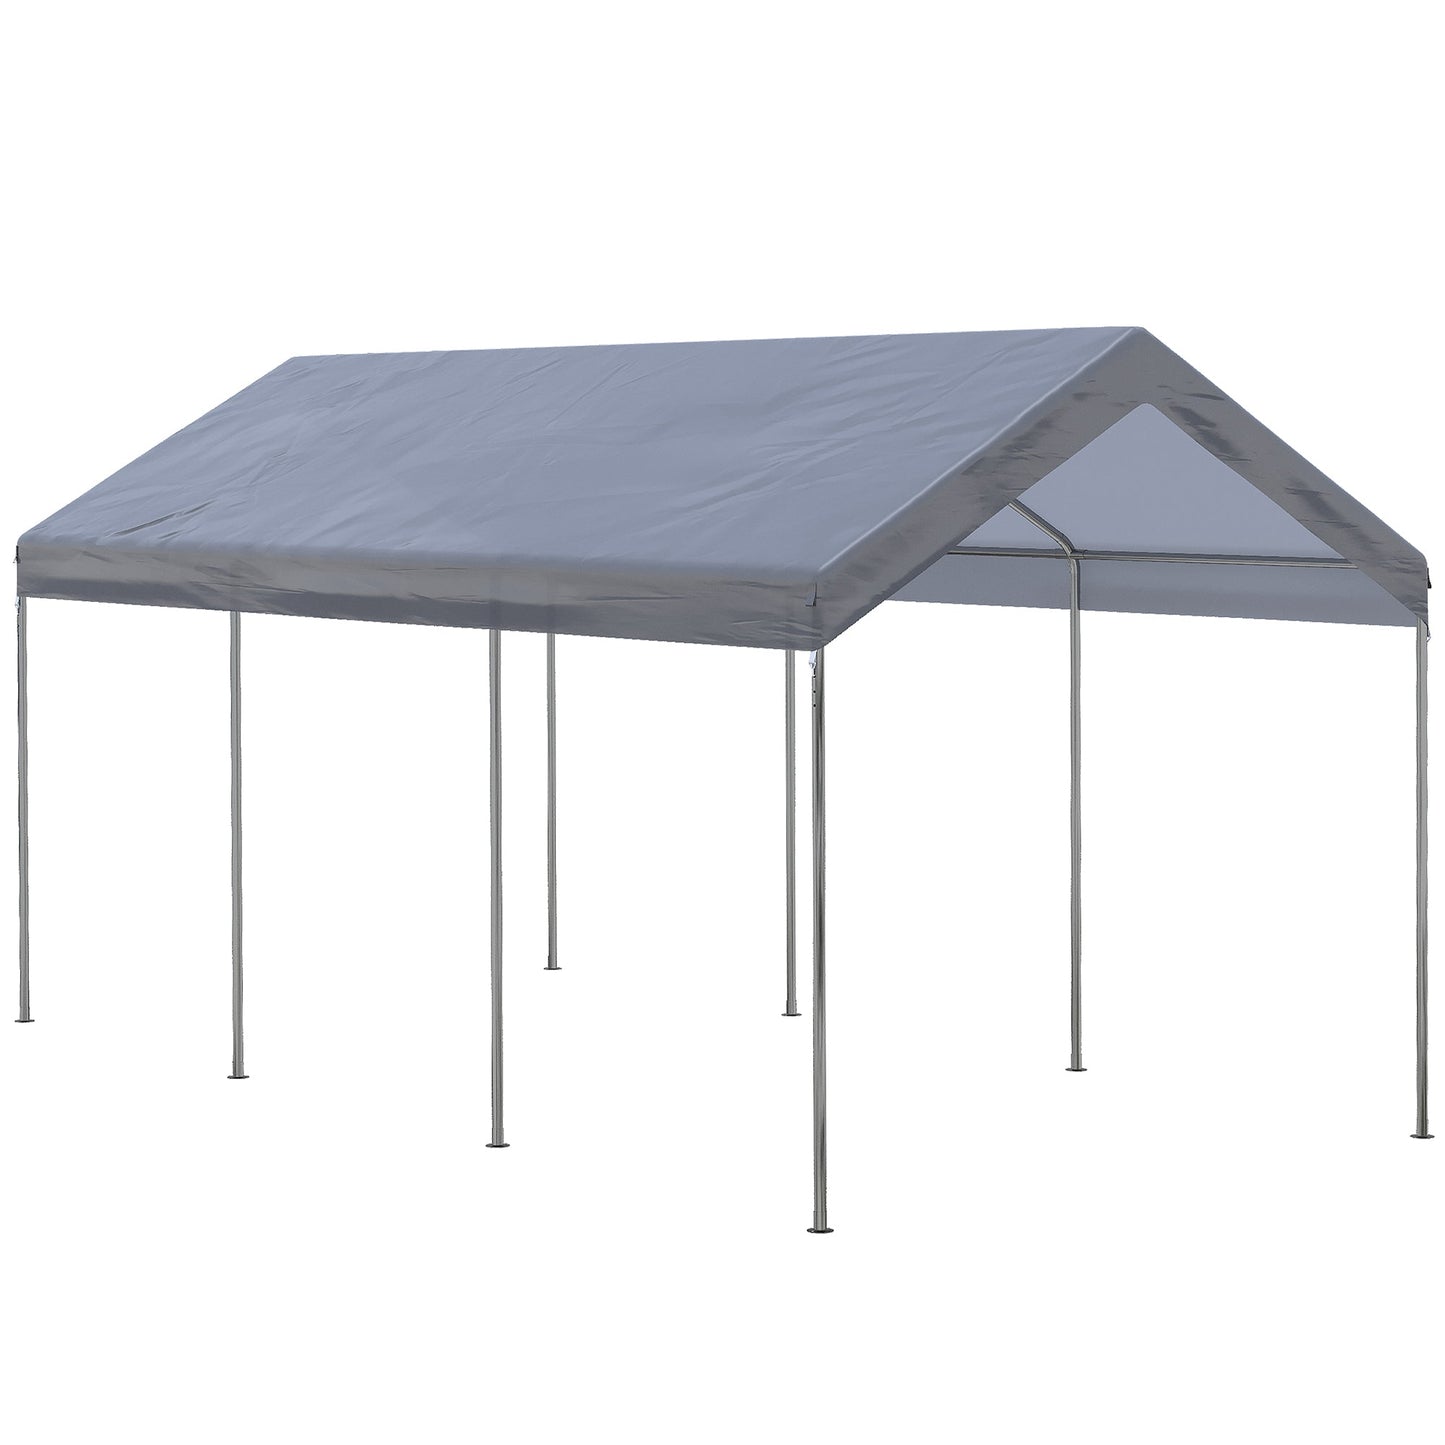 -Outsunny 10' x 20' Carport, Portable Garage & Patio Canopy Tent Storage Shelter, Adjustable Height, Anti-UV Cover for Car, Truck - Outdoor Style Company